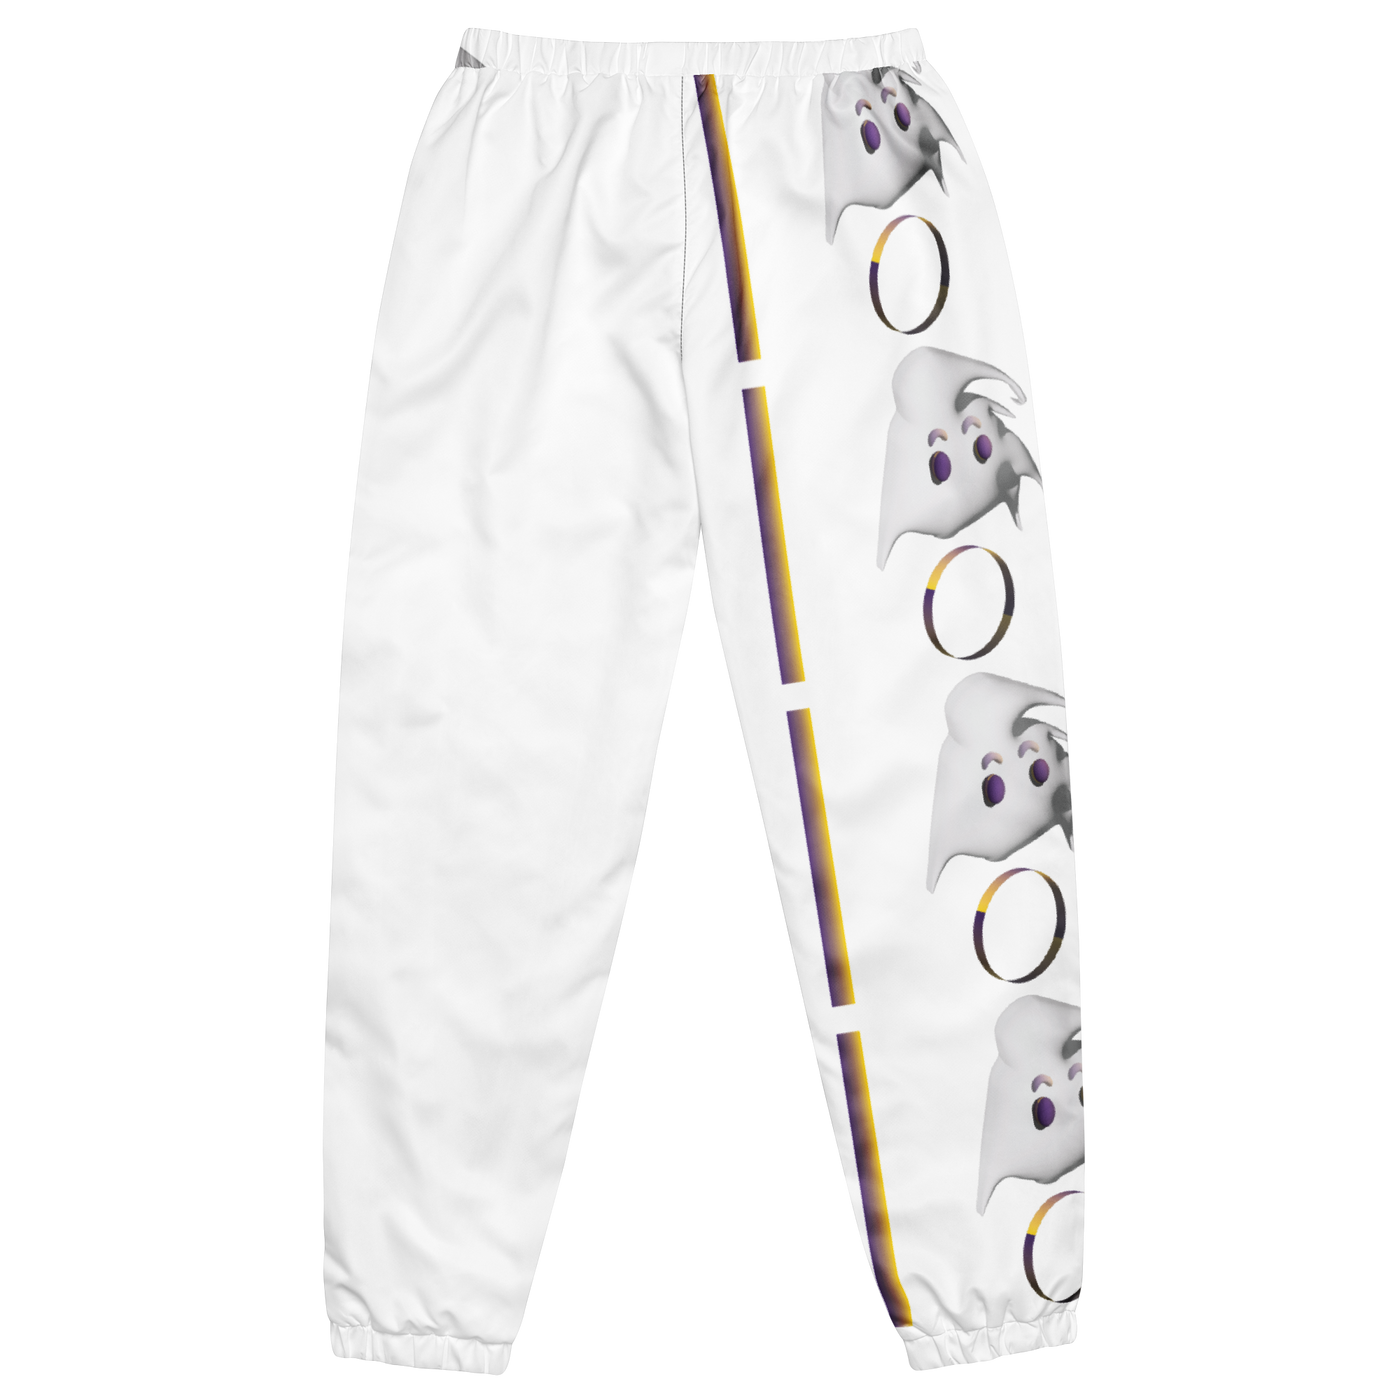 Material Ghost Track pants👻 #2